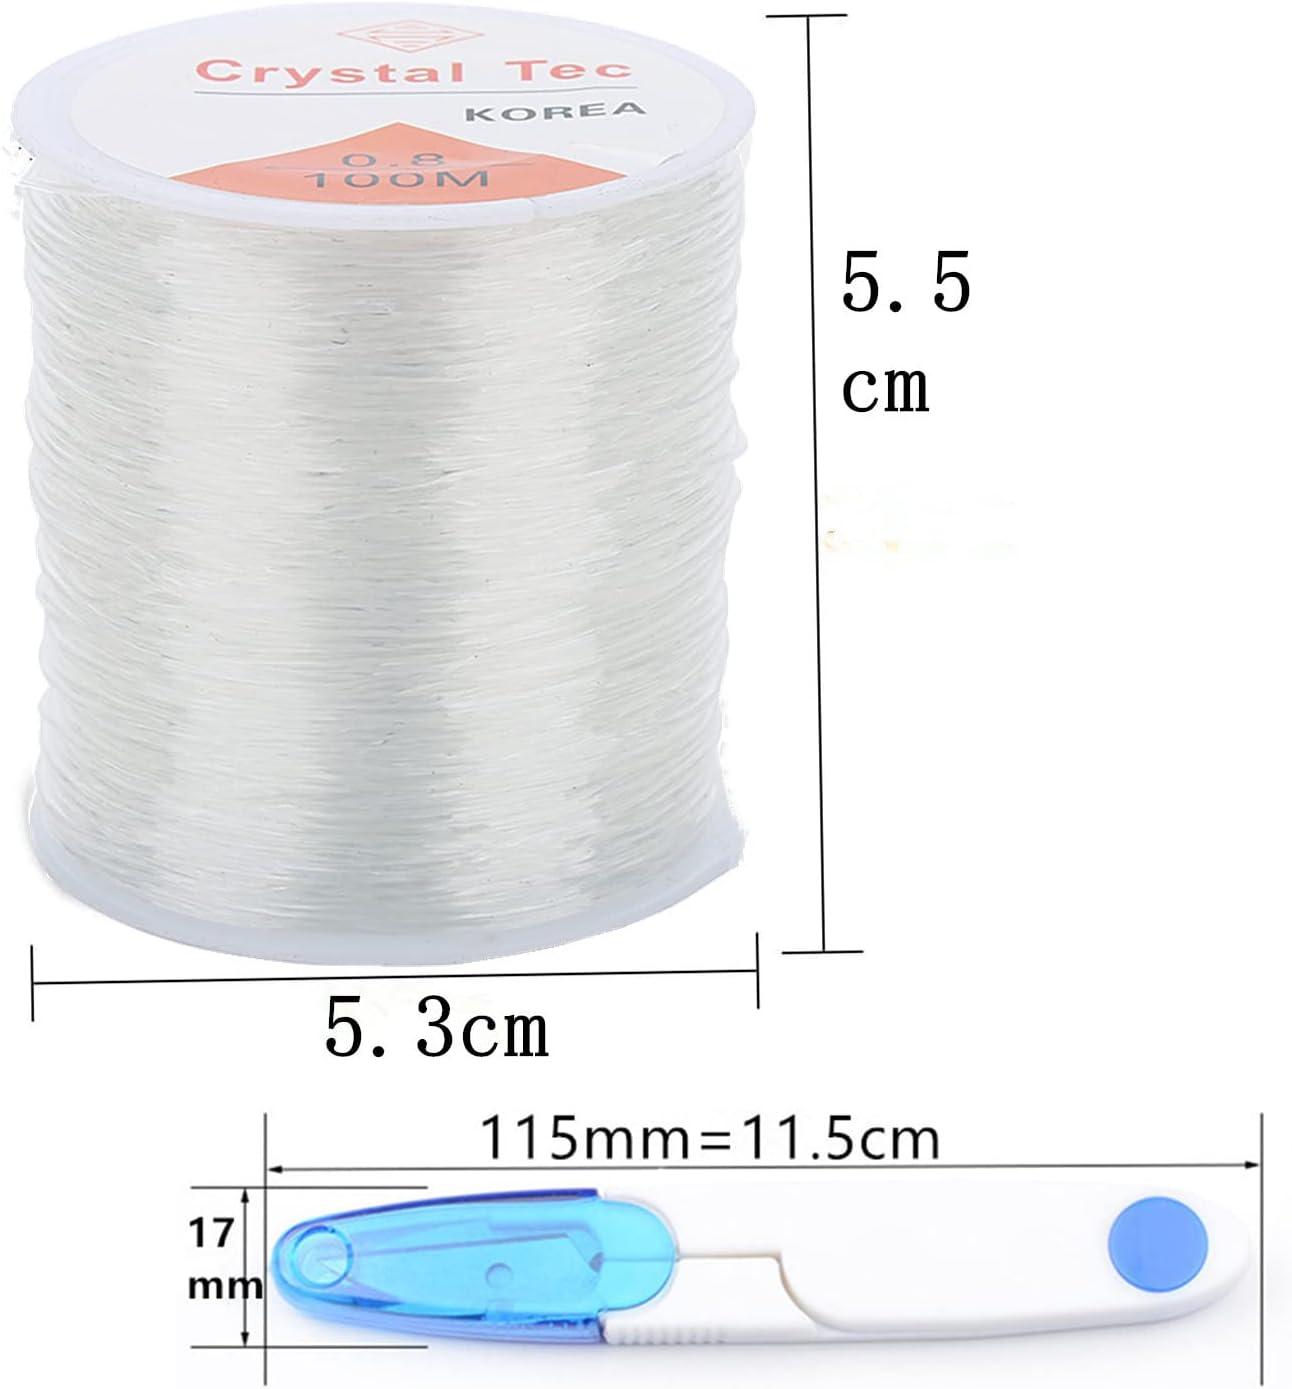 0.8mm Elastic String for Bracelets 2 Rolls of 100m Crystal (QIRANIYY)  Thread Nylon Cord for Bracelet Making Clear Stretchy for Jewelry Making  Necklace